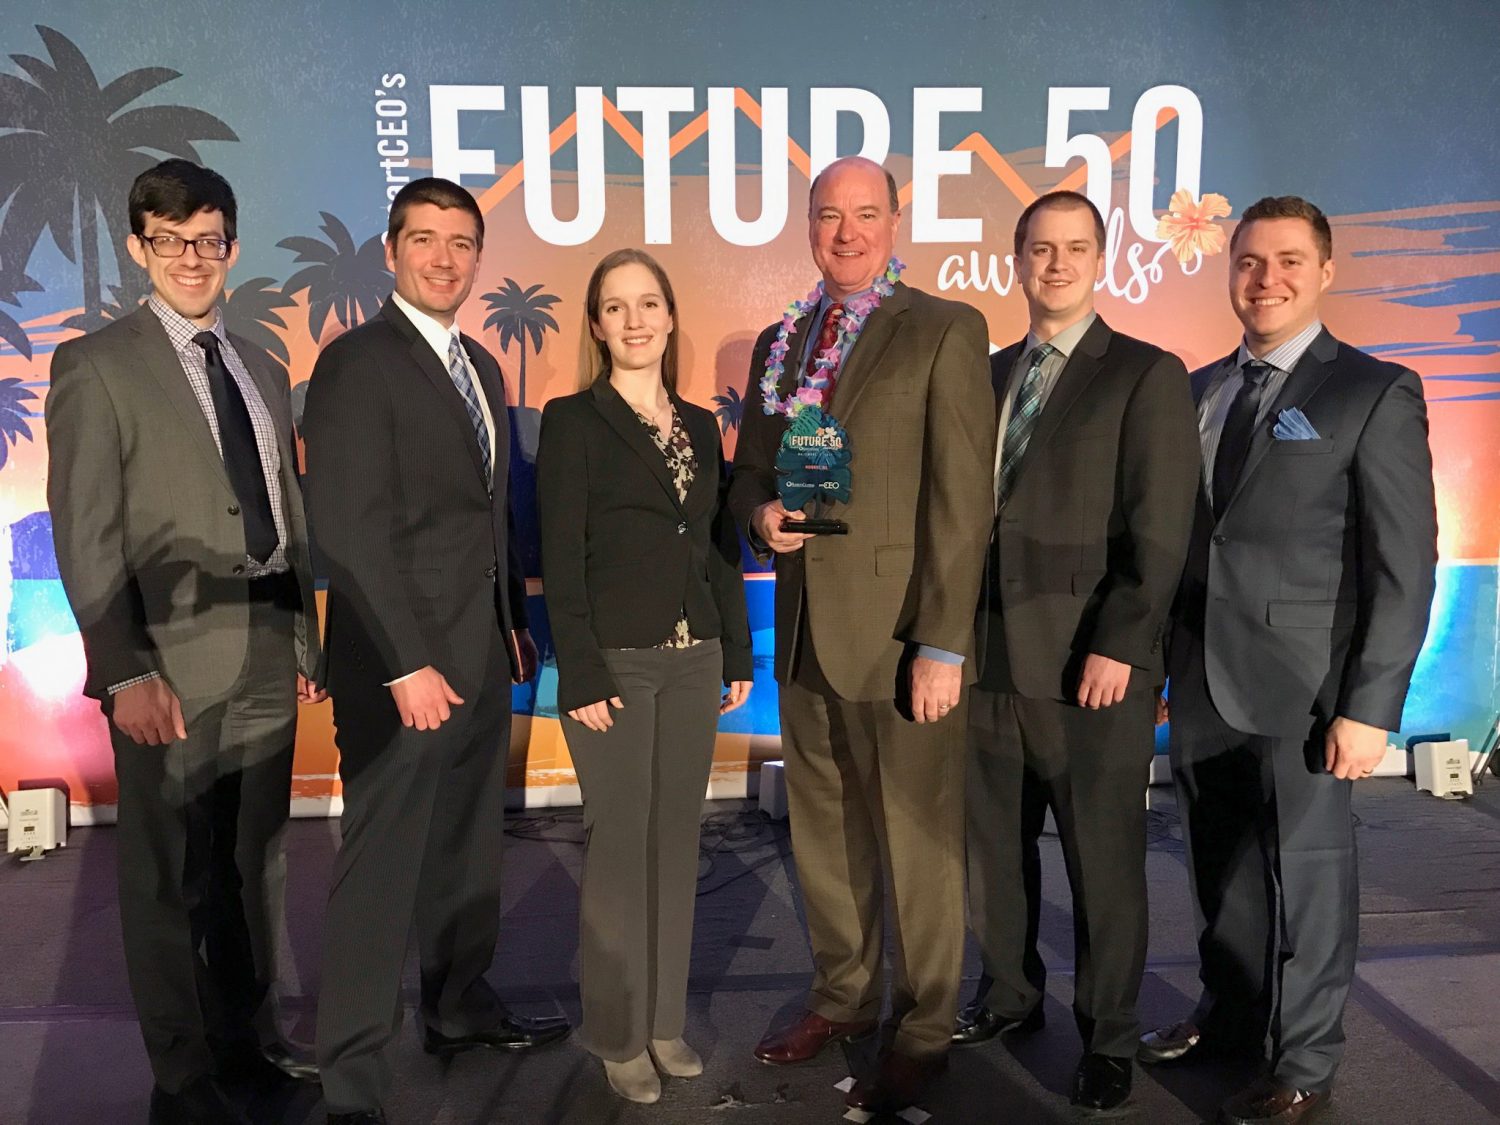 Visionist Honored at SmartCEO Magazine’s Future50 Awards